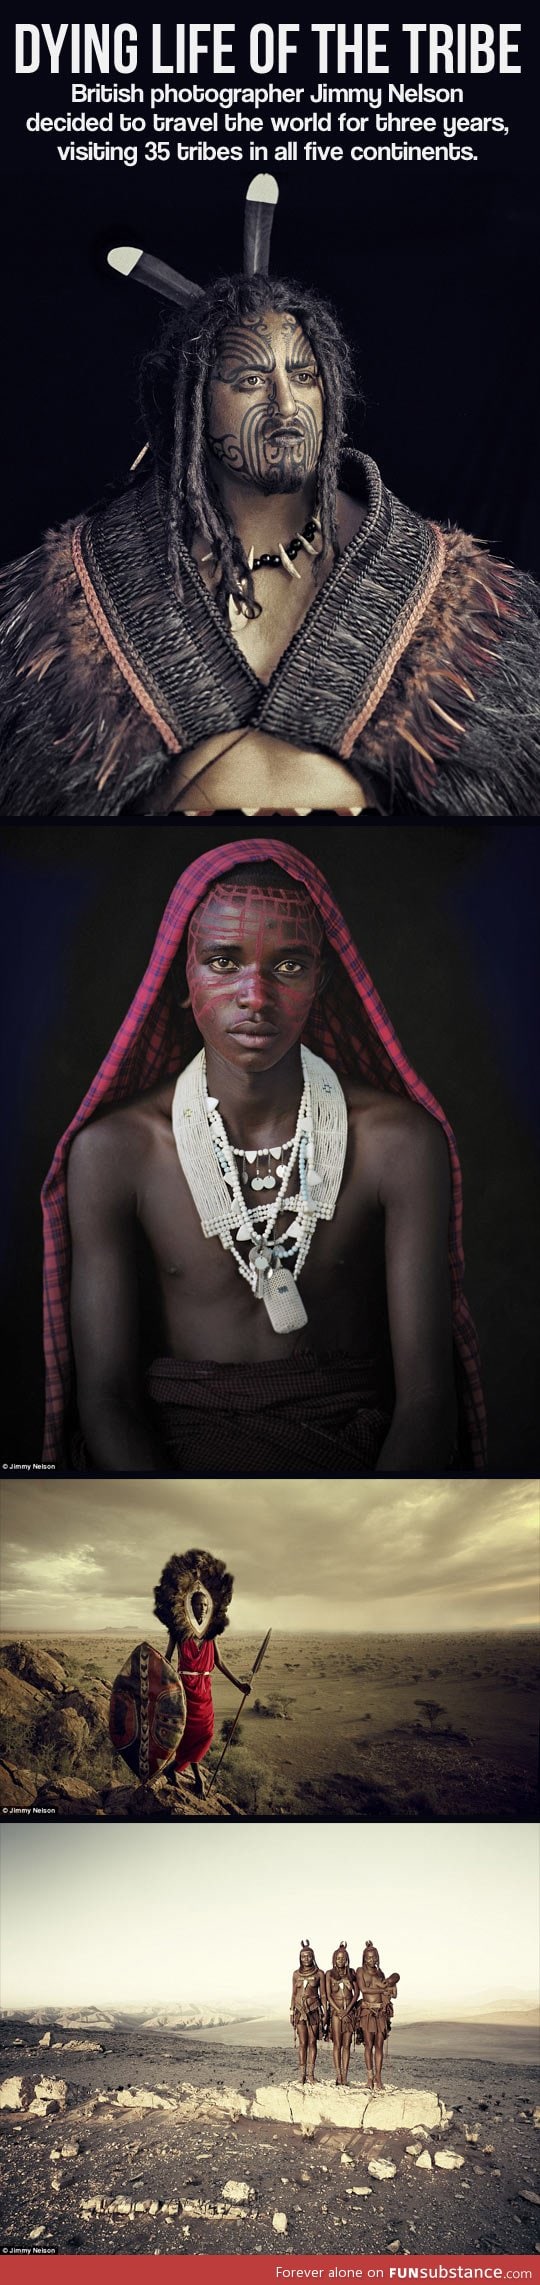 Photos taken around the world of some of the last forms of tribal life